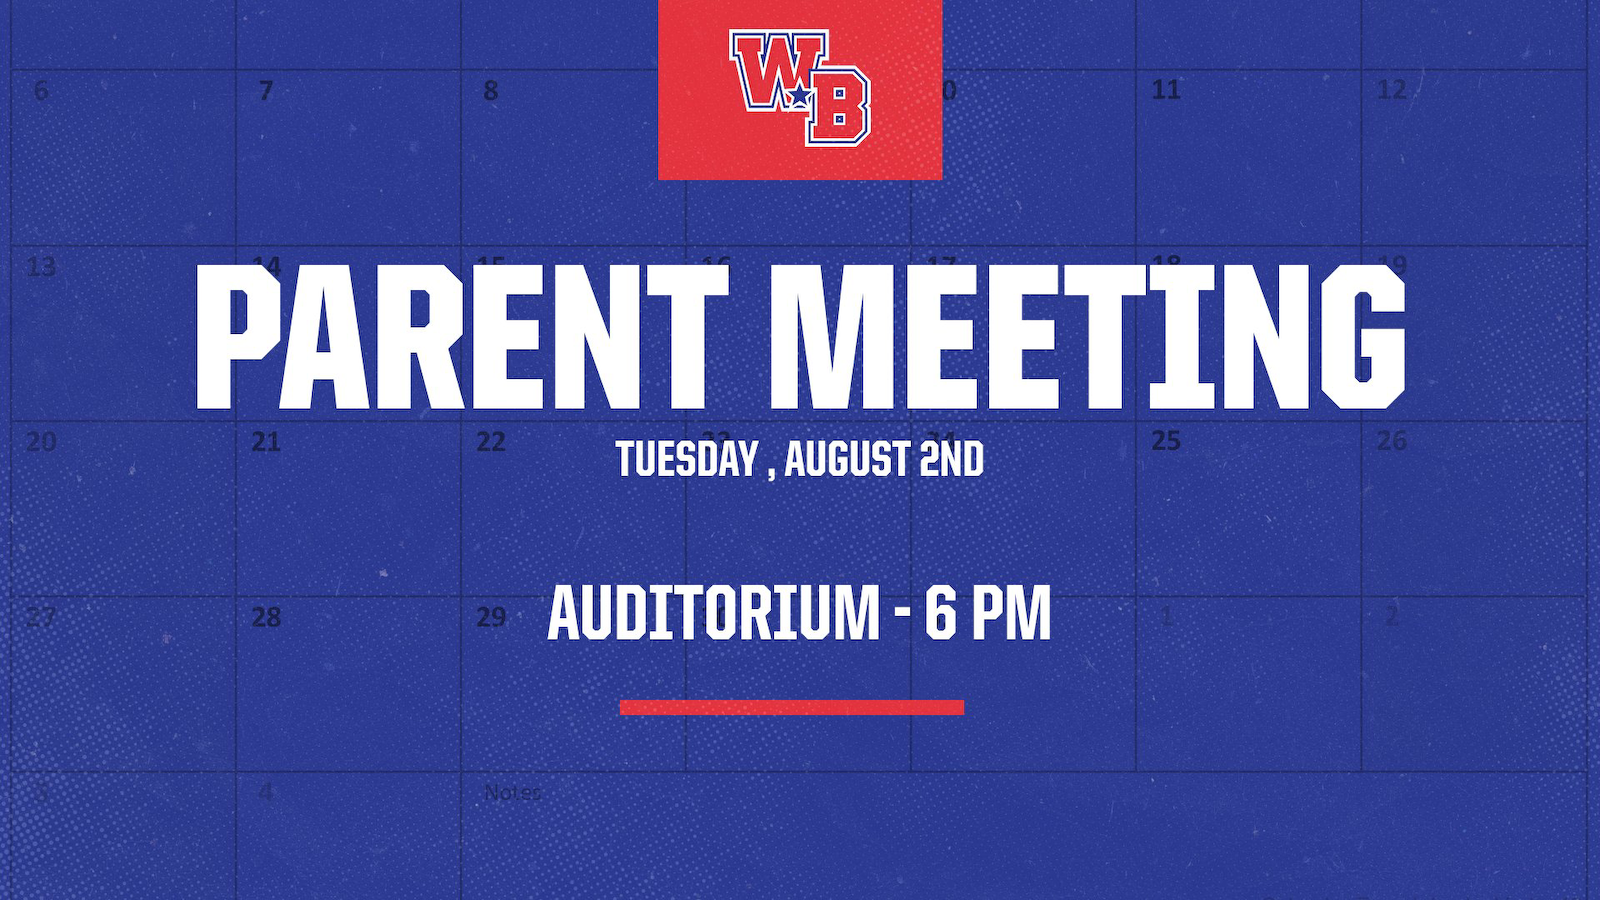 Parent Meeting Graphic - 23.png